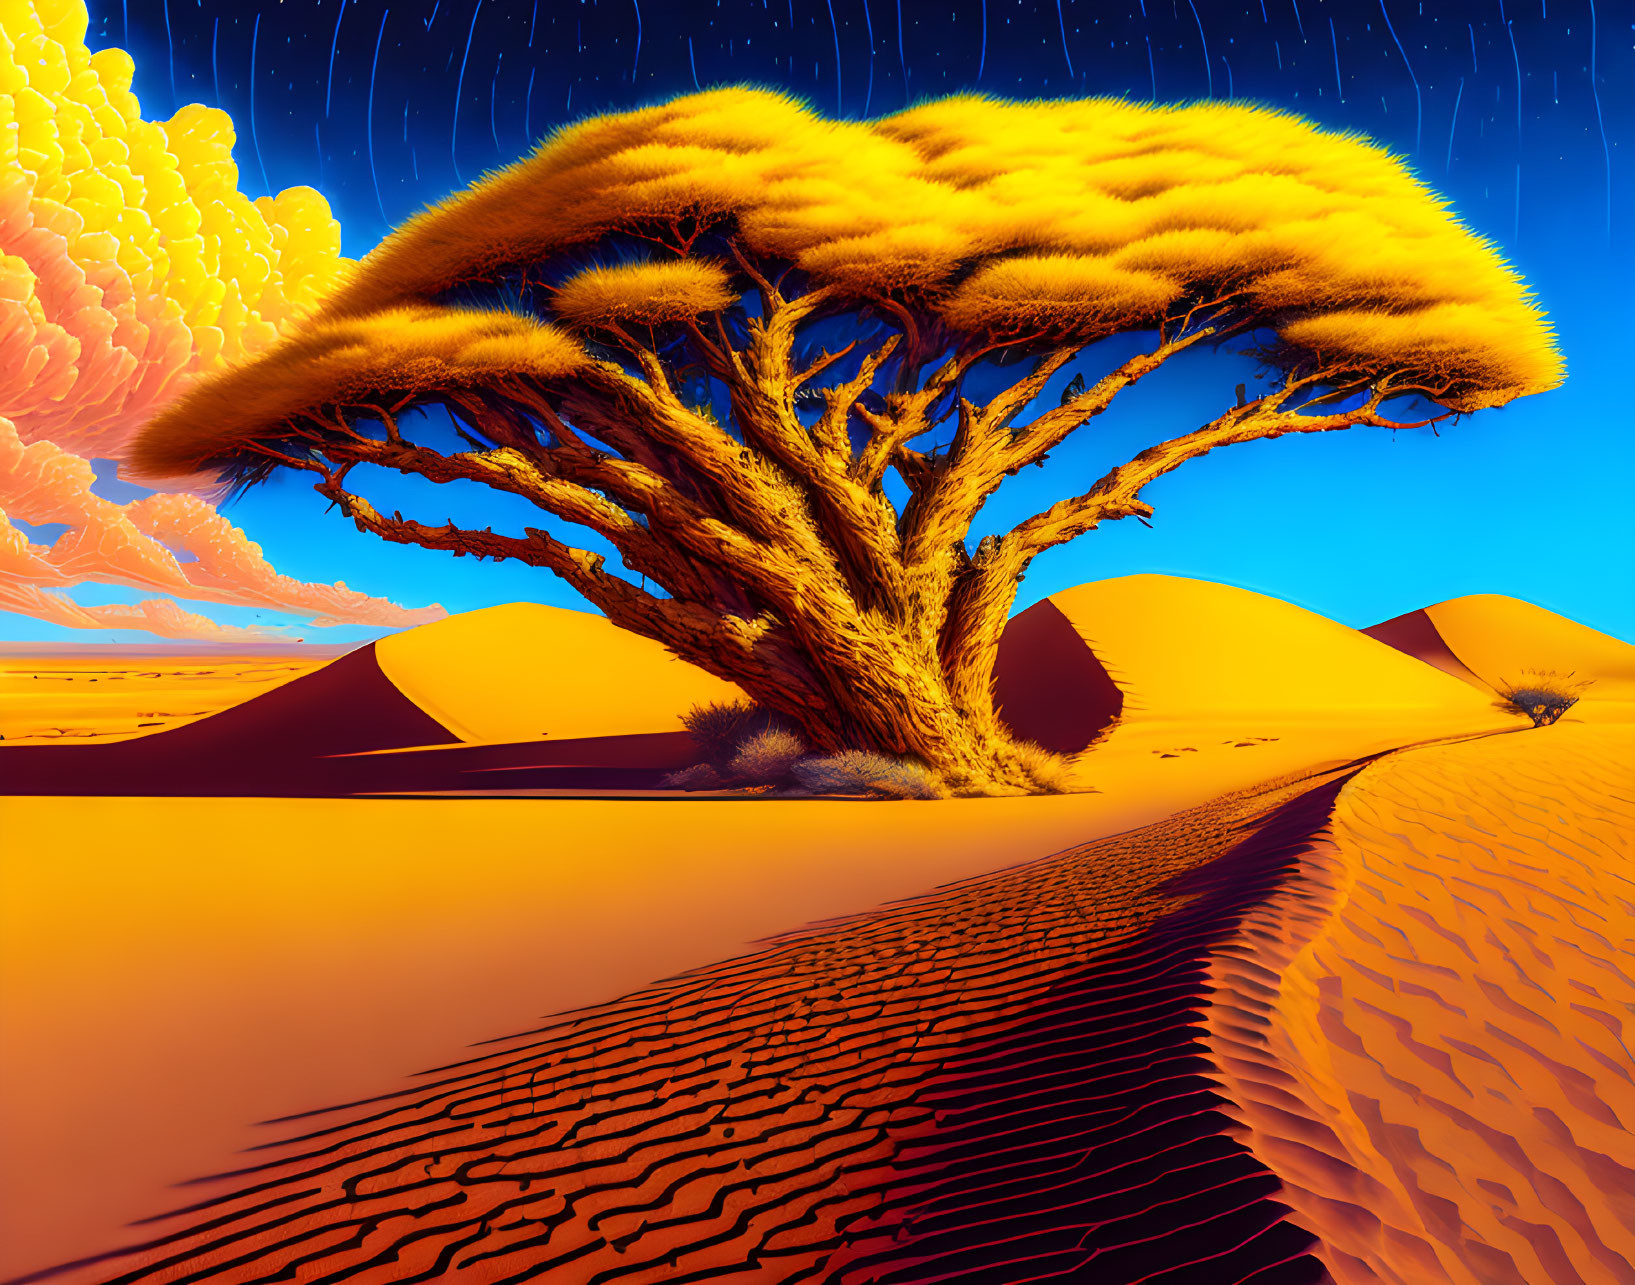 Colorful digital art: Whimsical tree with golden canopy against desert backdrop